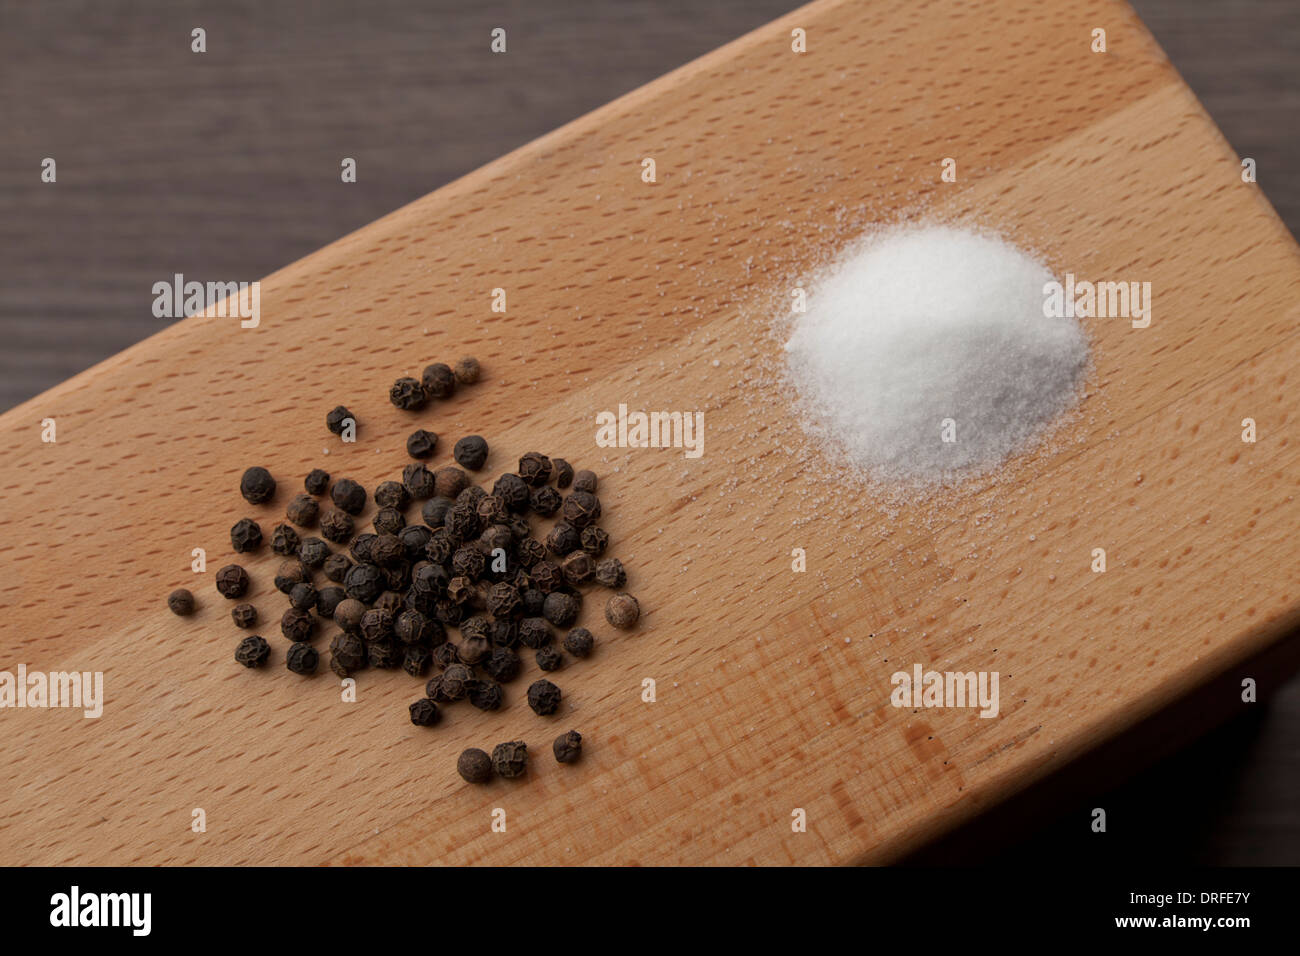 salt and pepper on wooden background Stock Photo